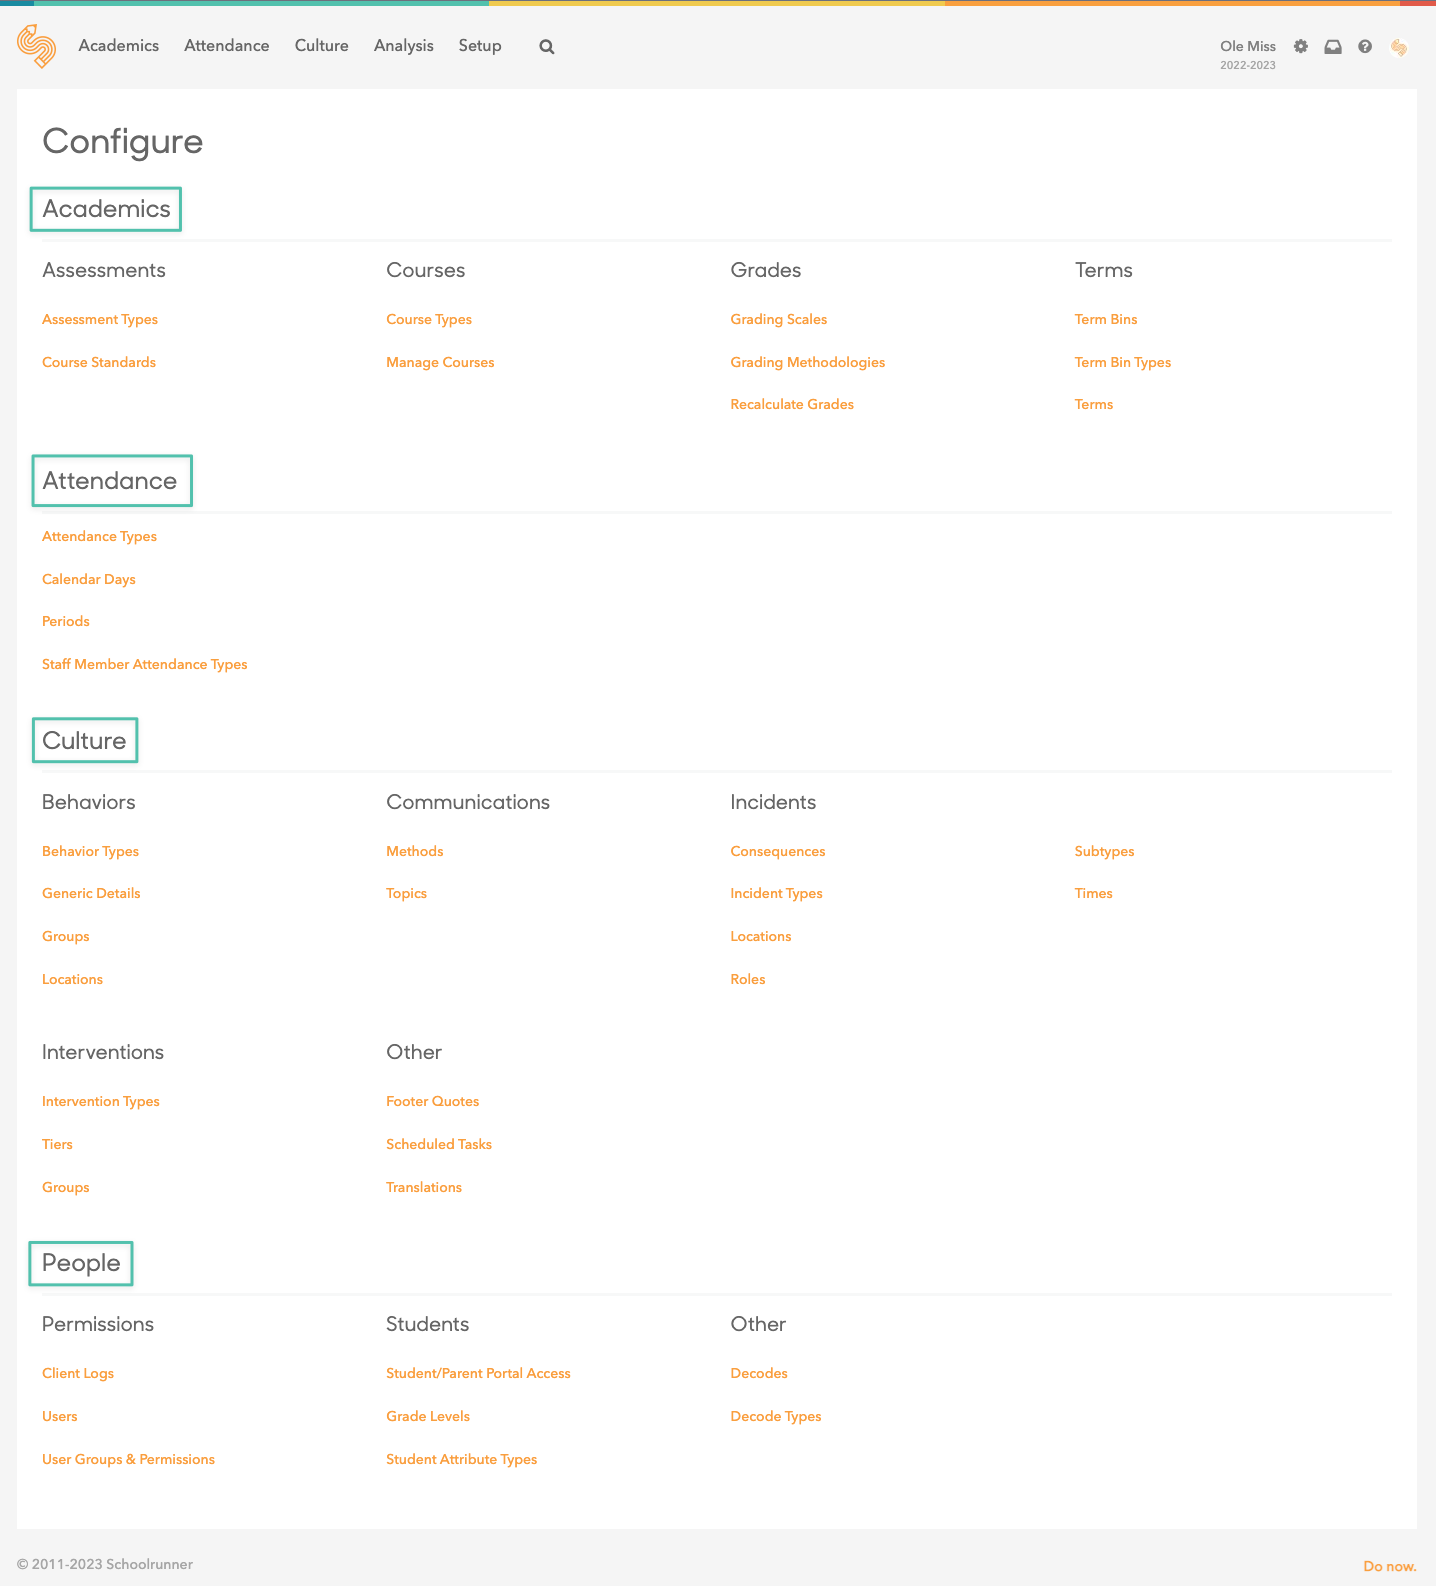 configure_page_overview.png